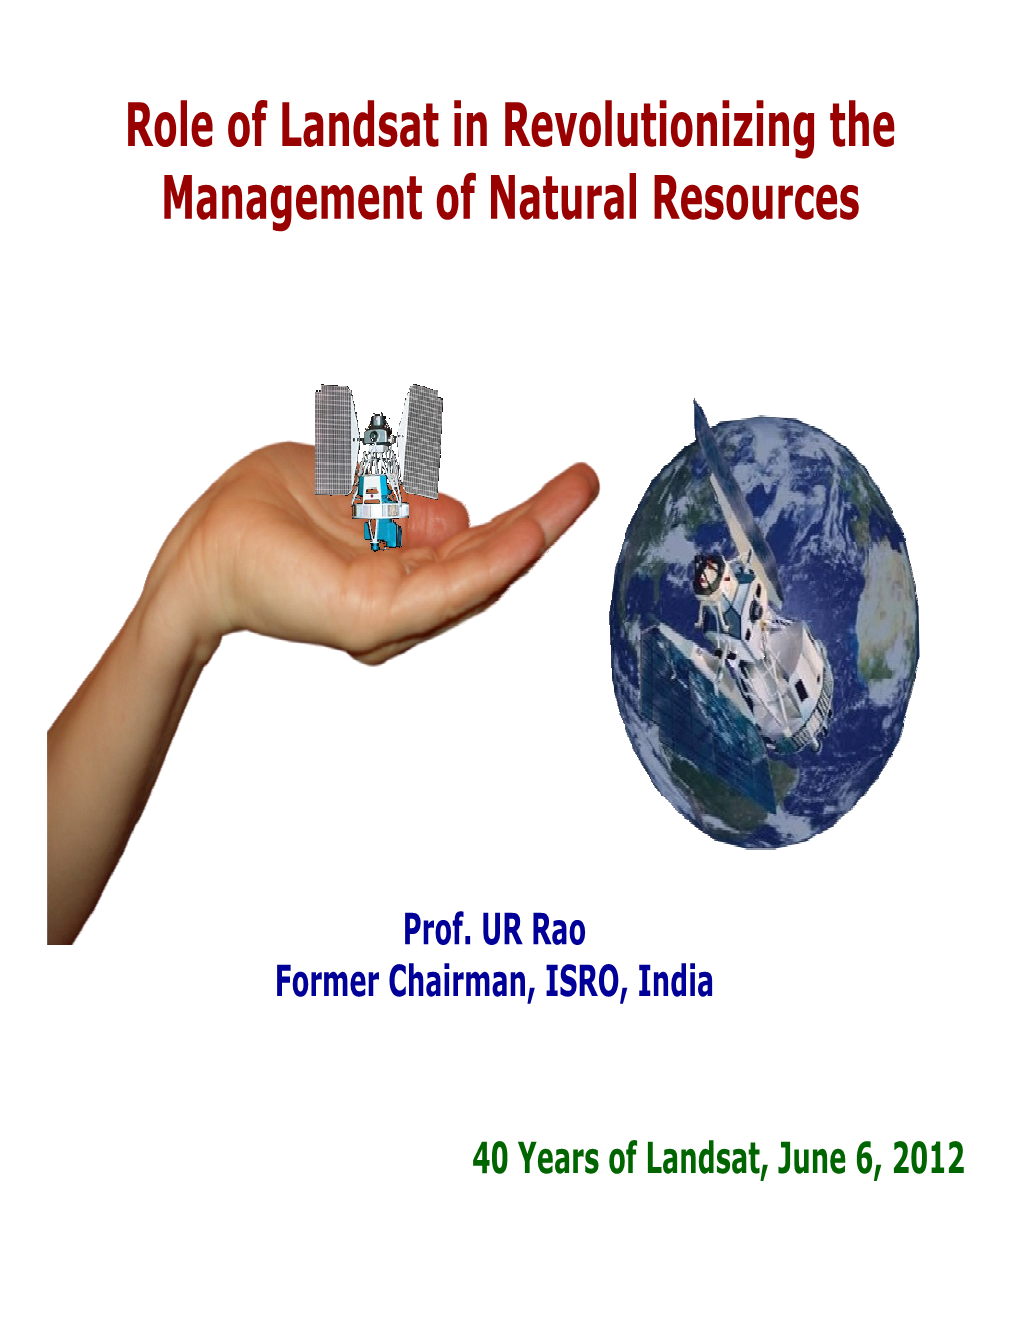 Role of Landsat in Revolutionizing the Management of Natural Resources